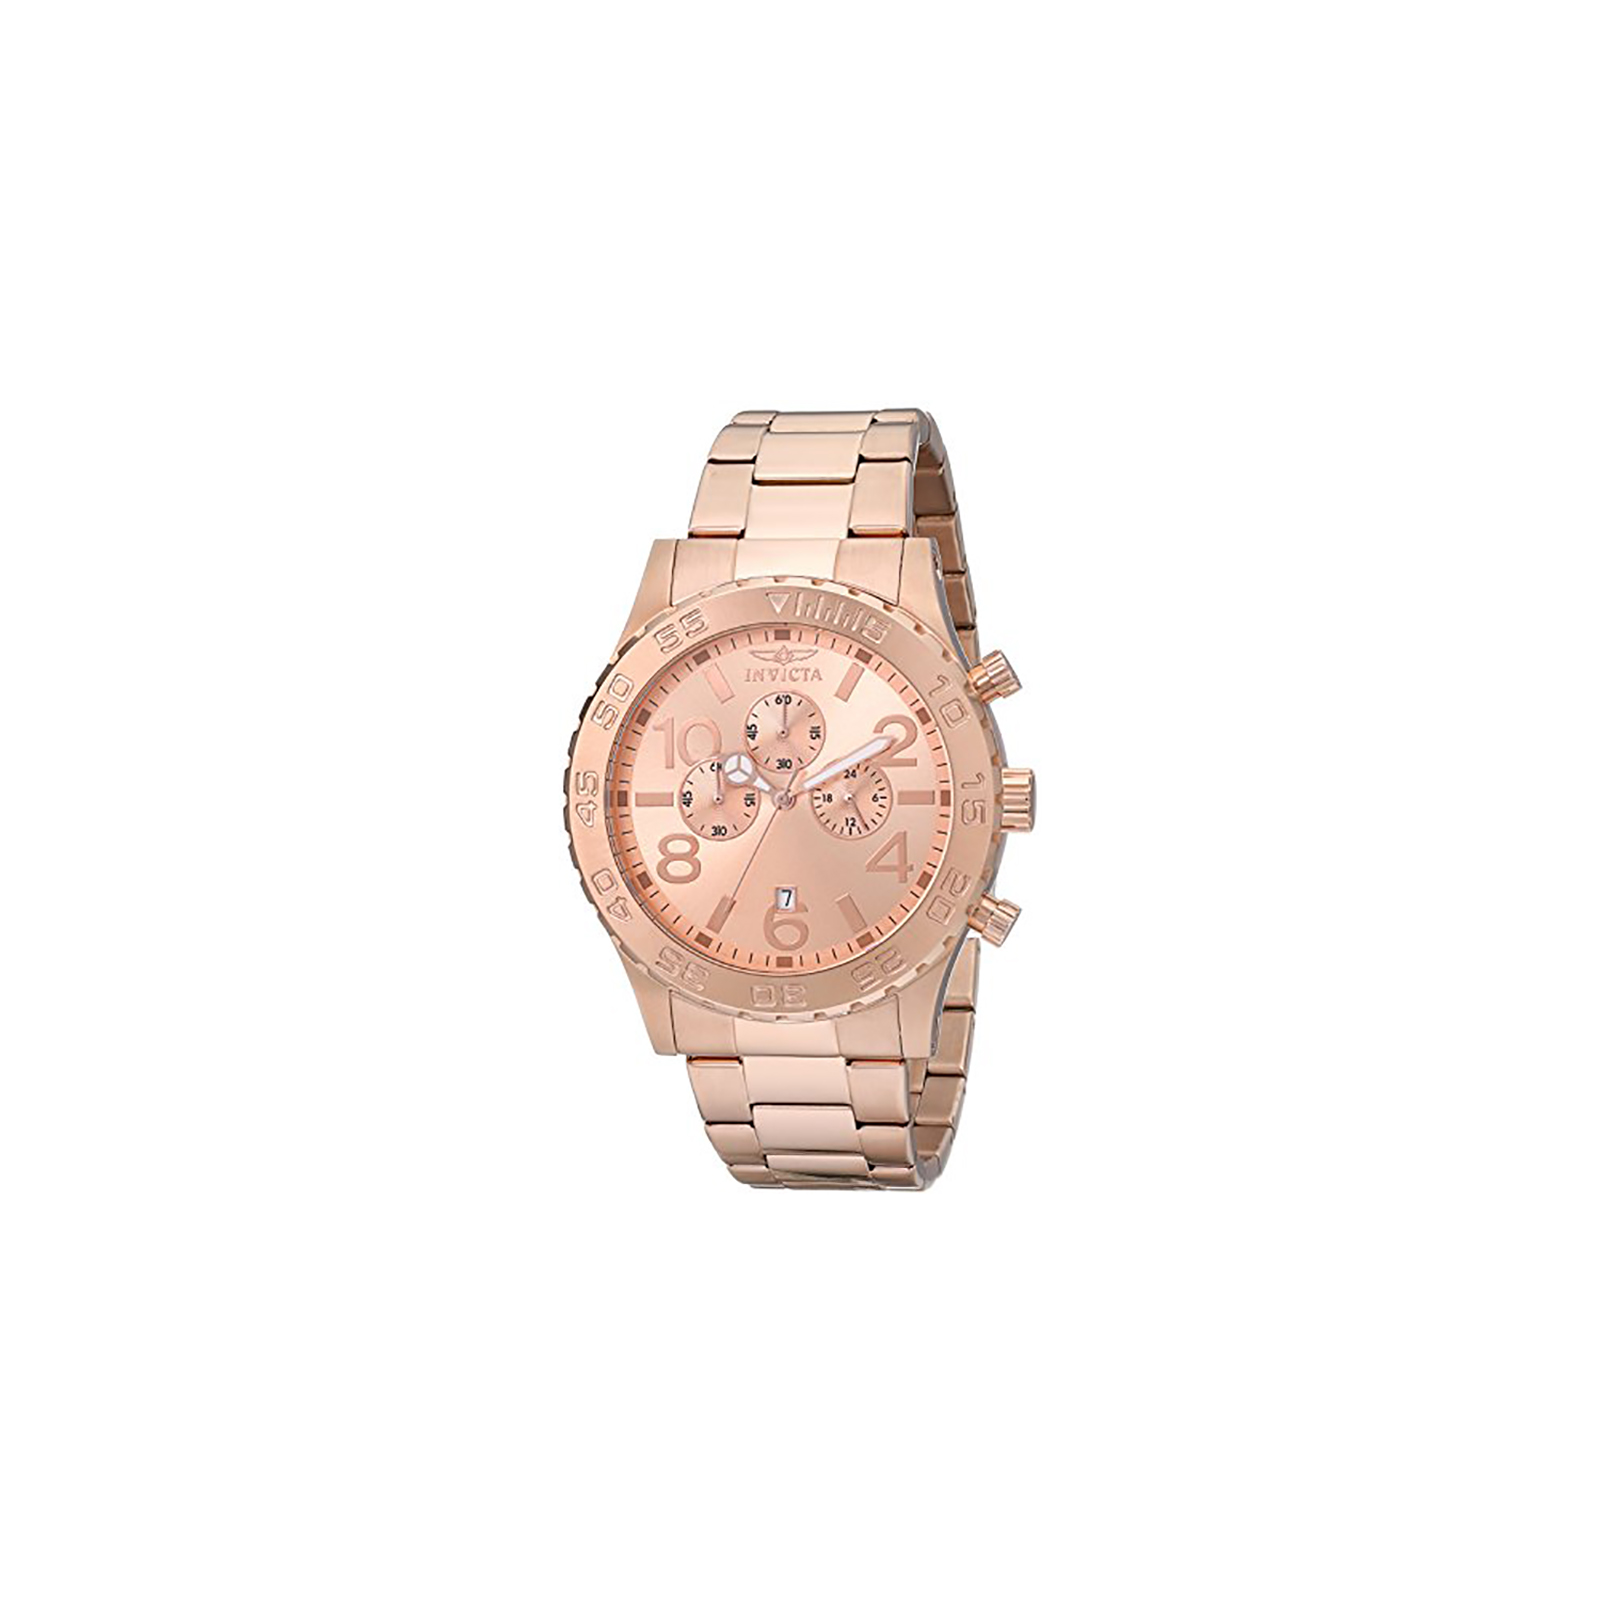 Invicta 1271 Men's Specialty Stainless Steel Watch - Rose Gold